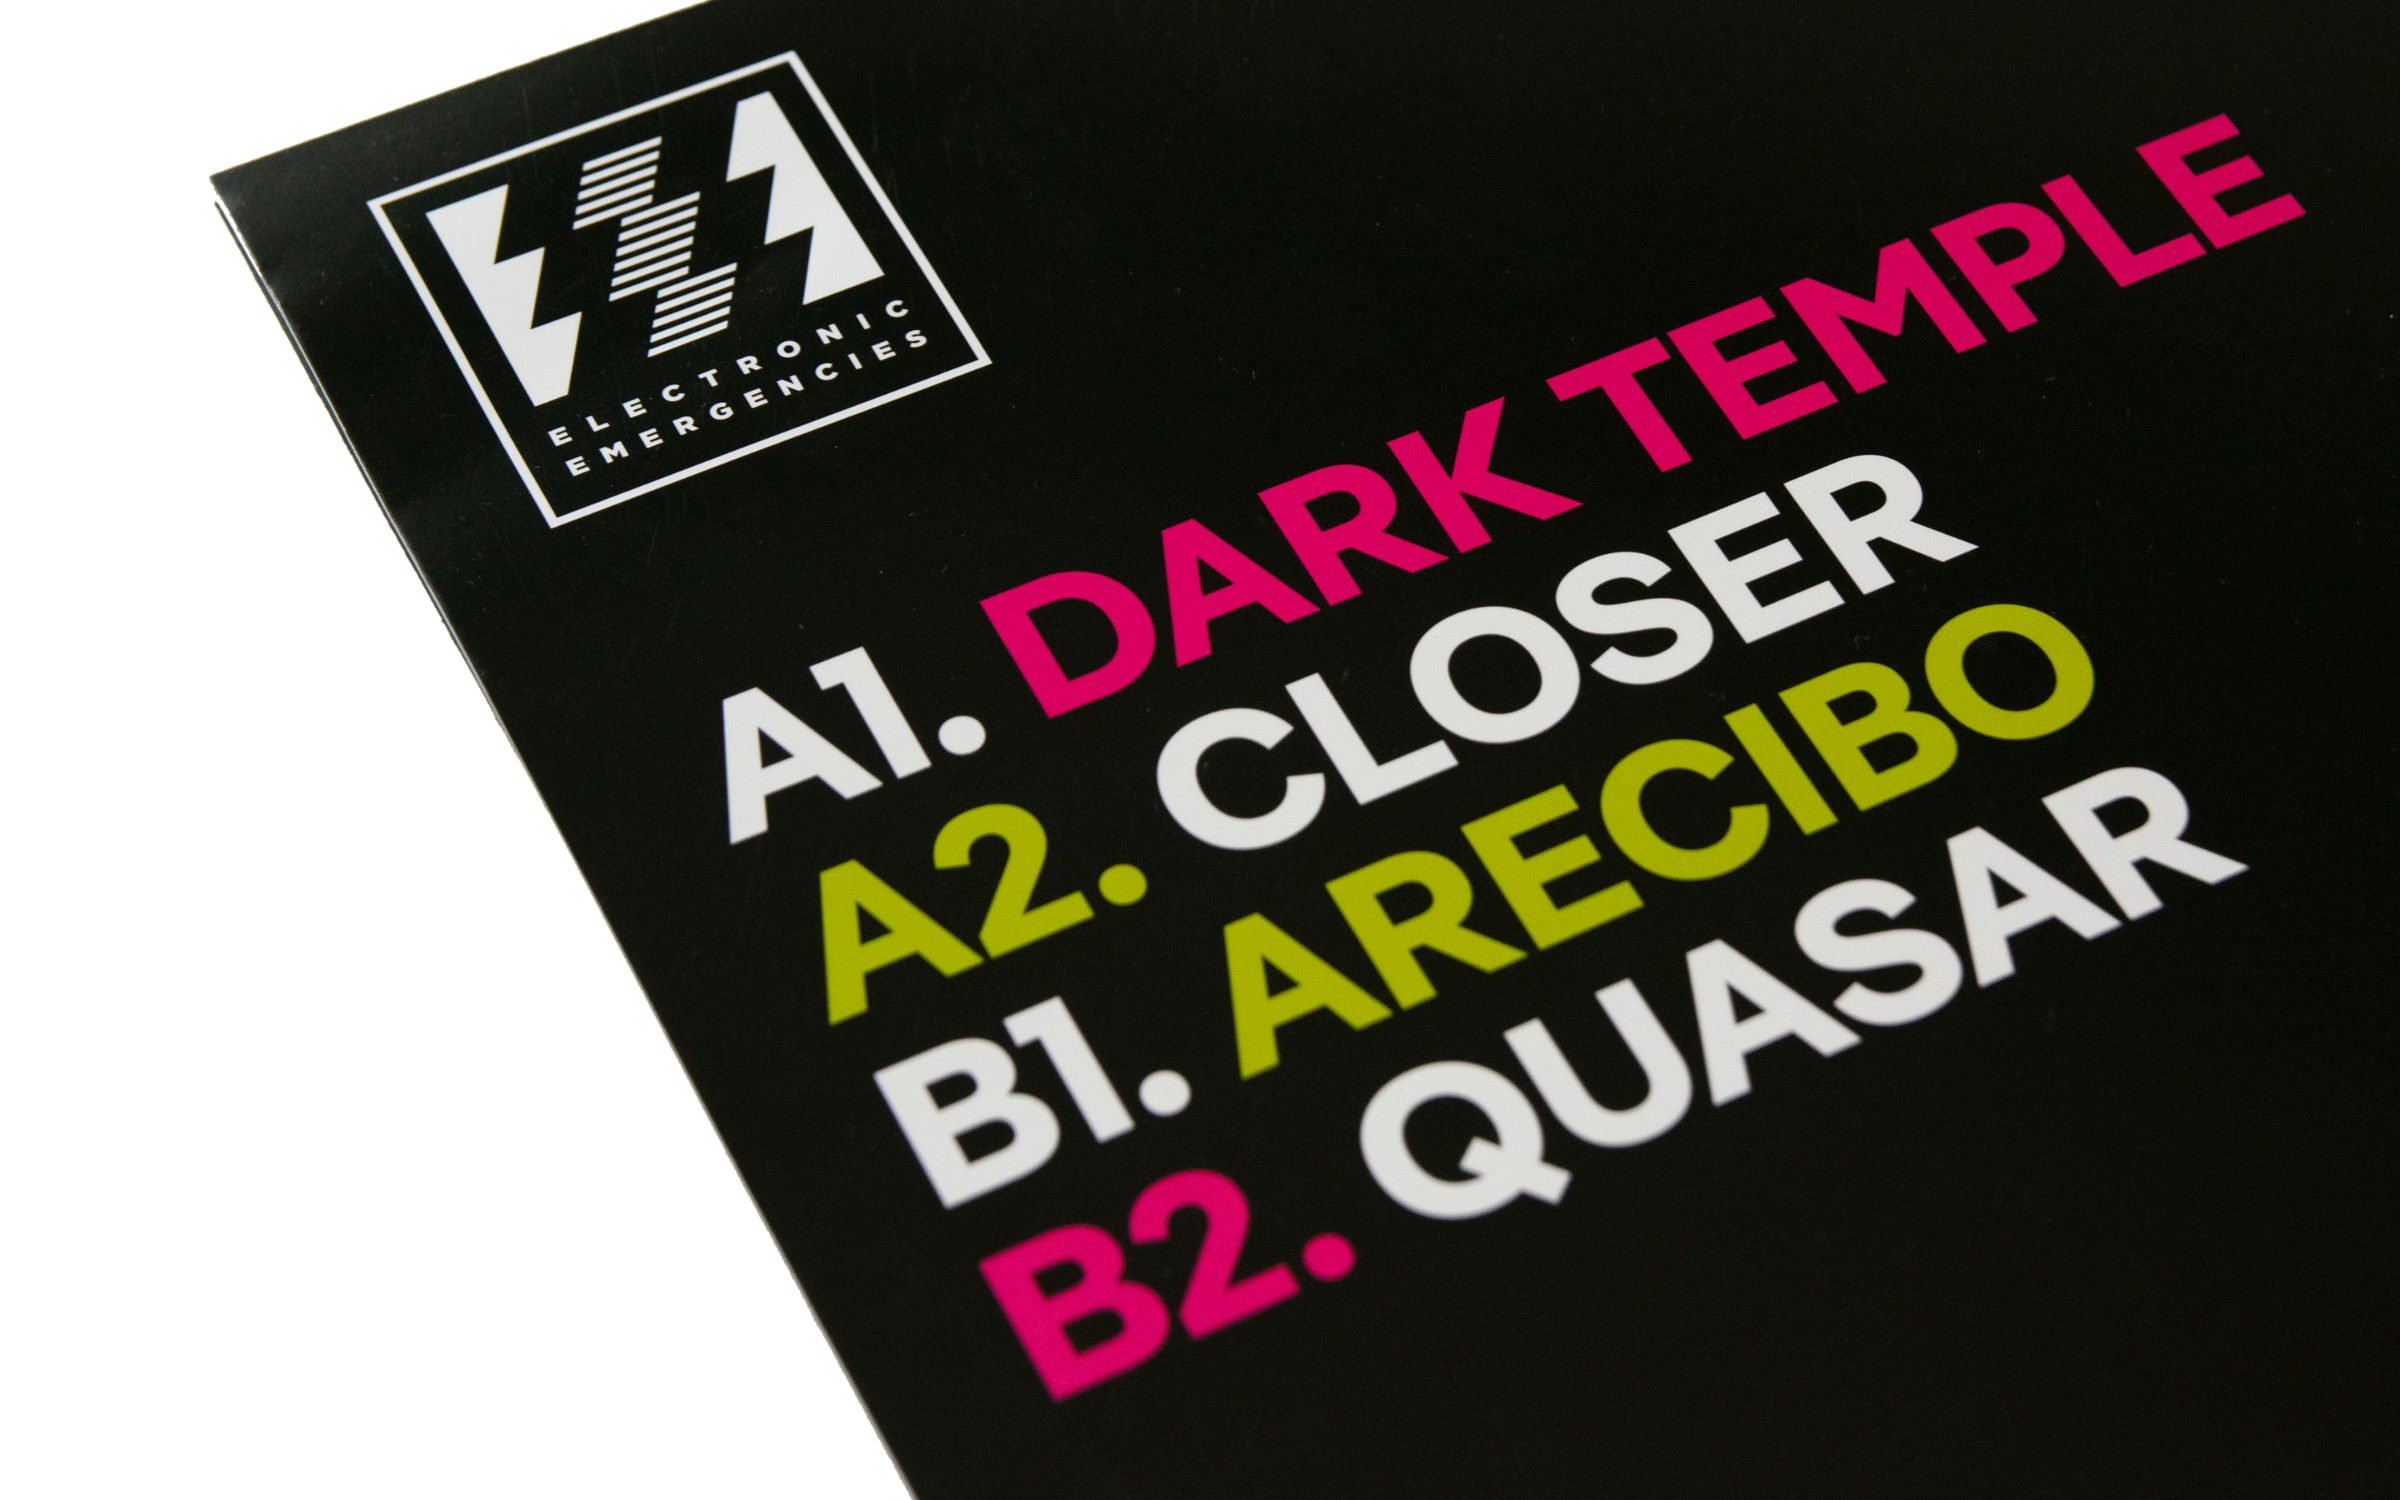 The typeface Pangea in use for DJ AVIVX’s ‘Dark Temple’ 12" EP, a moody, energetic house record.